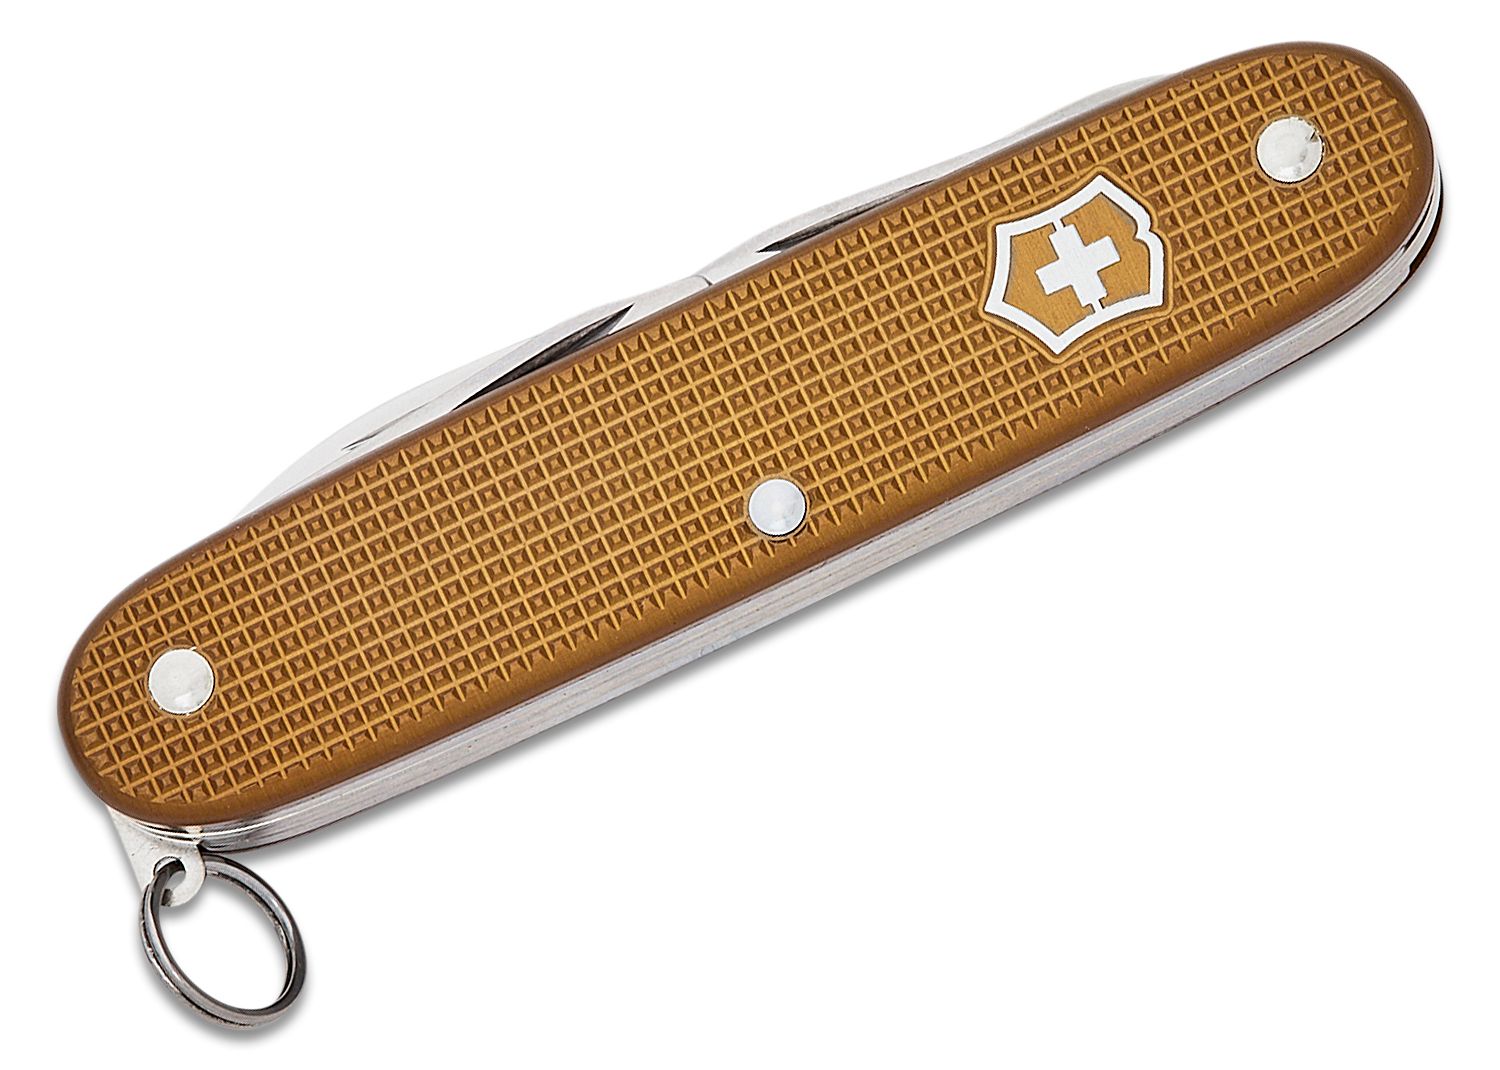 You Won't Lose the Victorinox Limited Edition Alox Collection